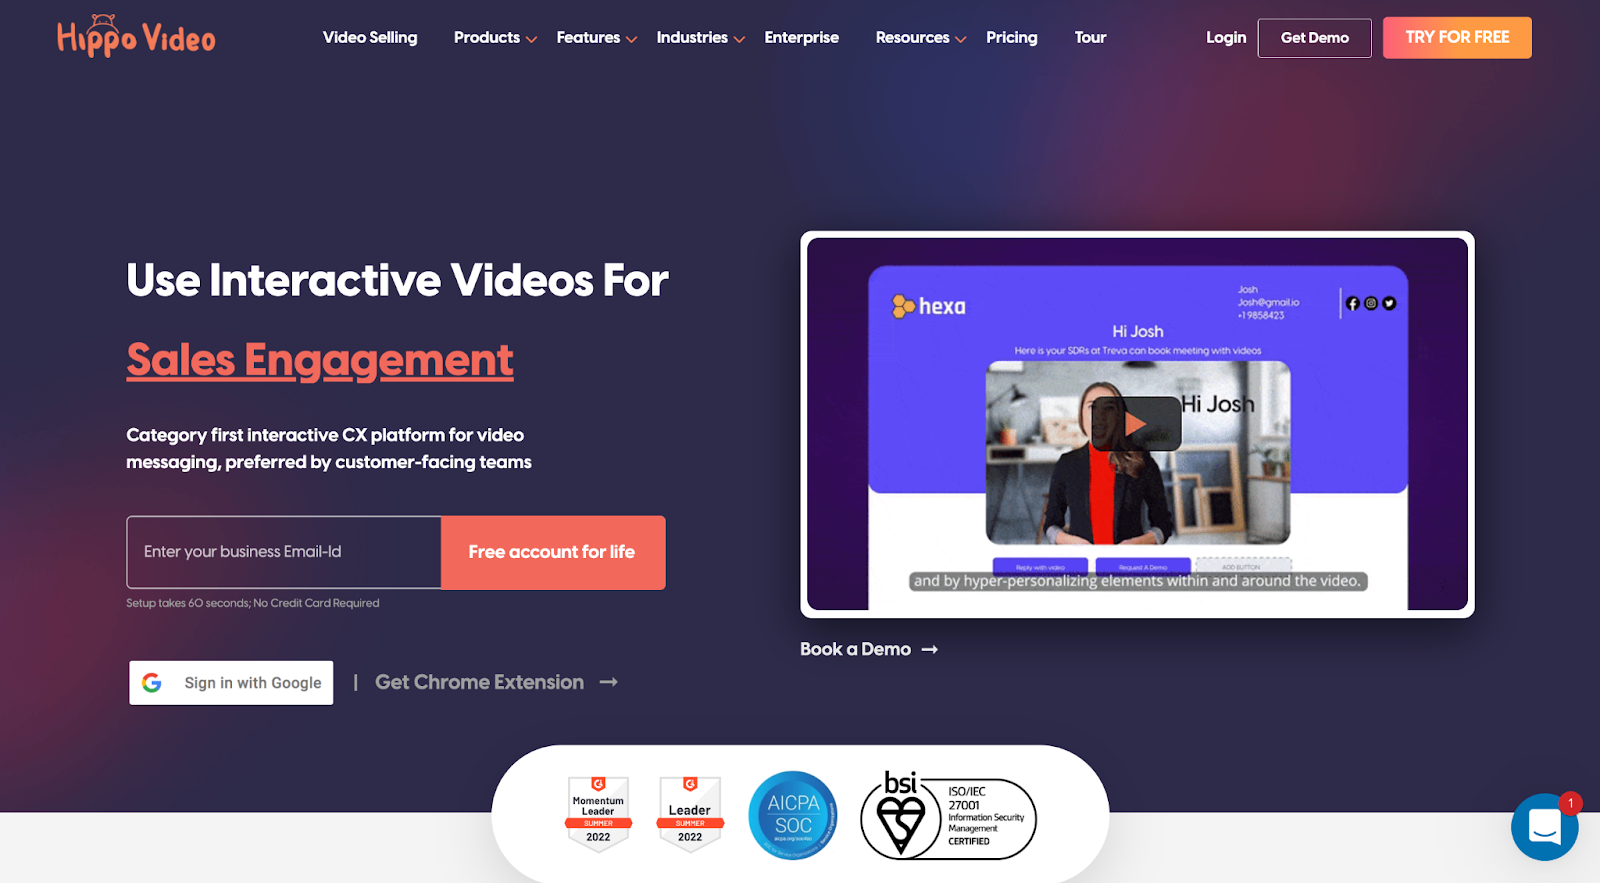 Hippo Video home page video tutorial software 